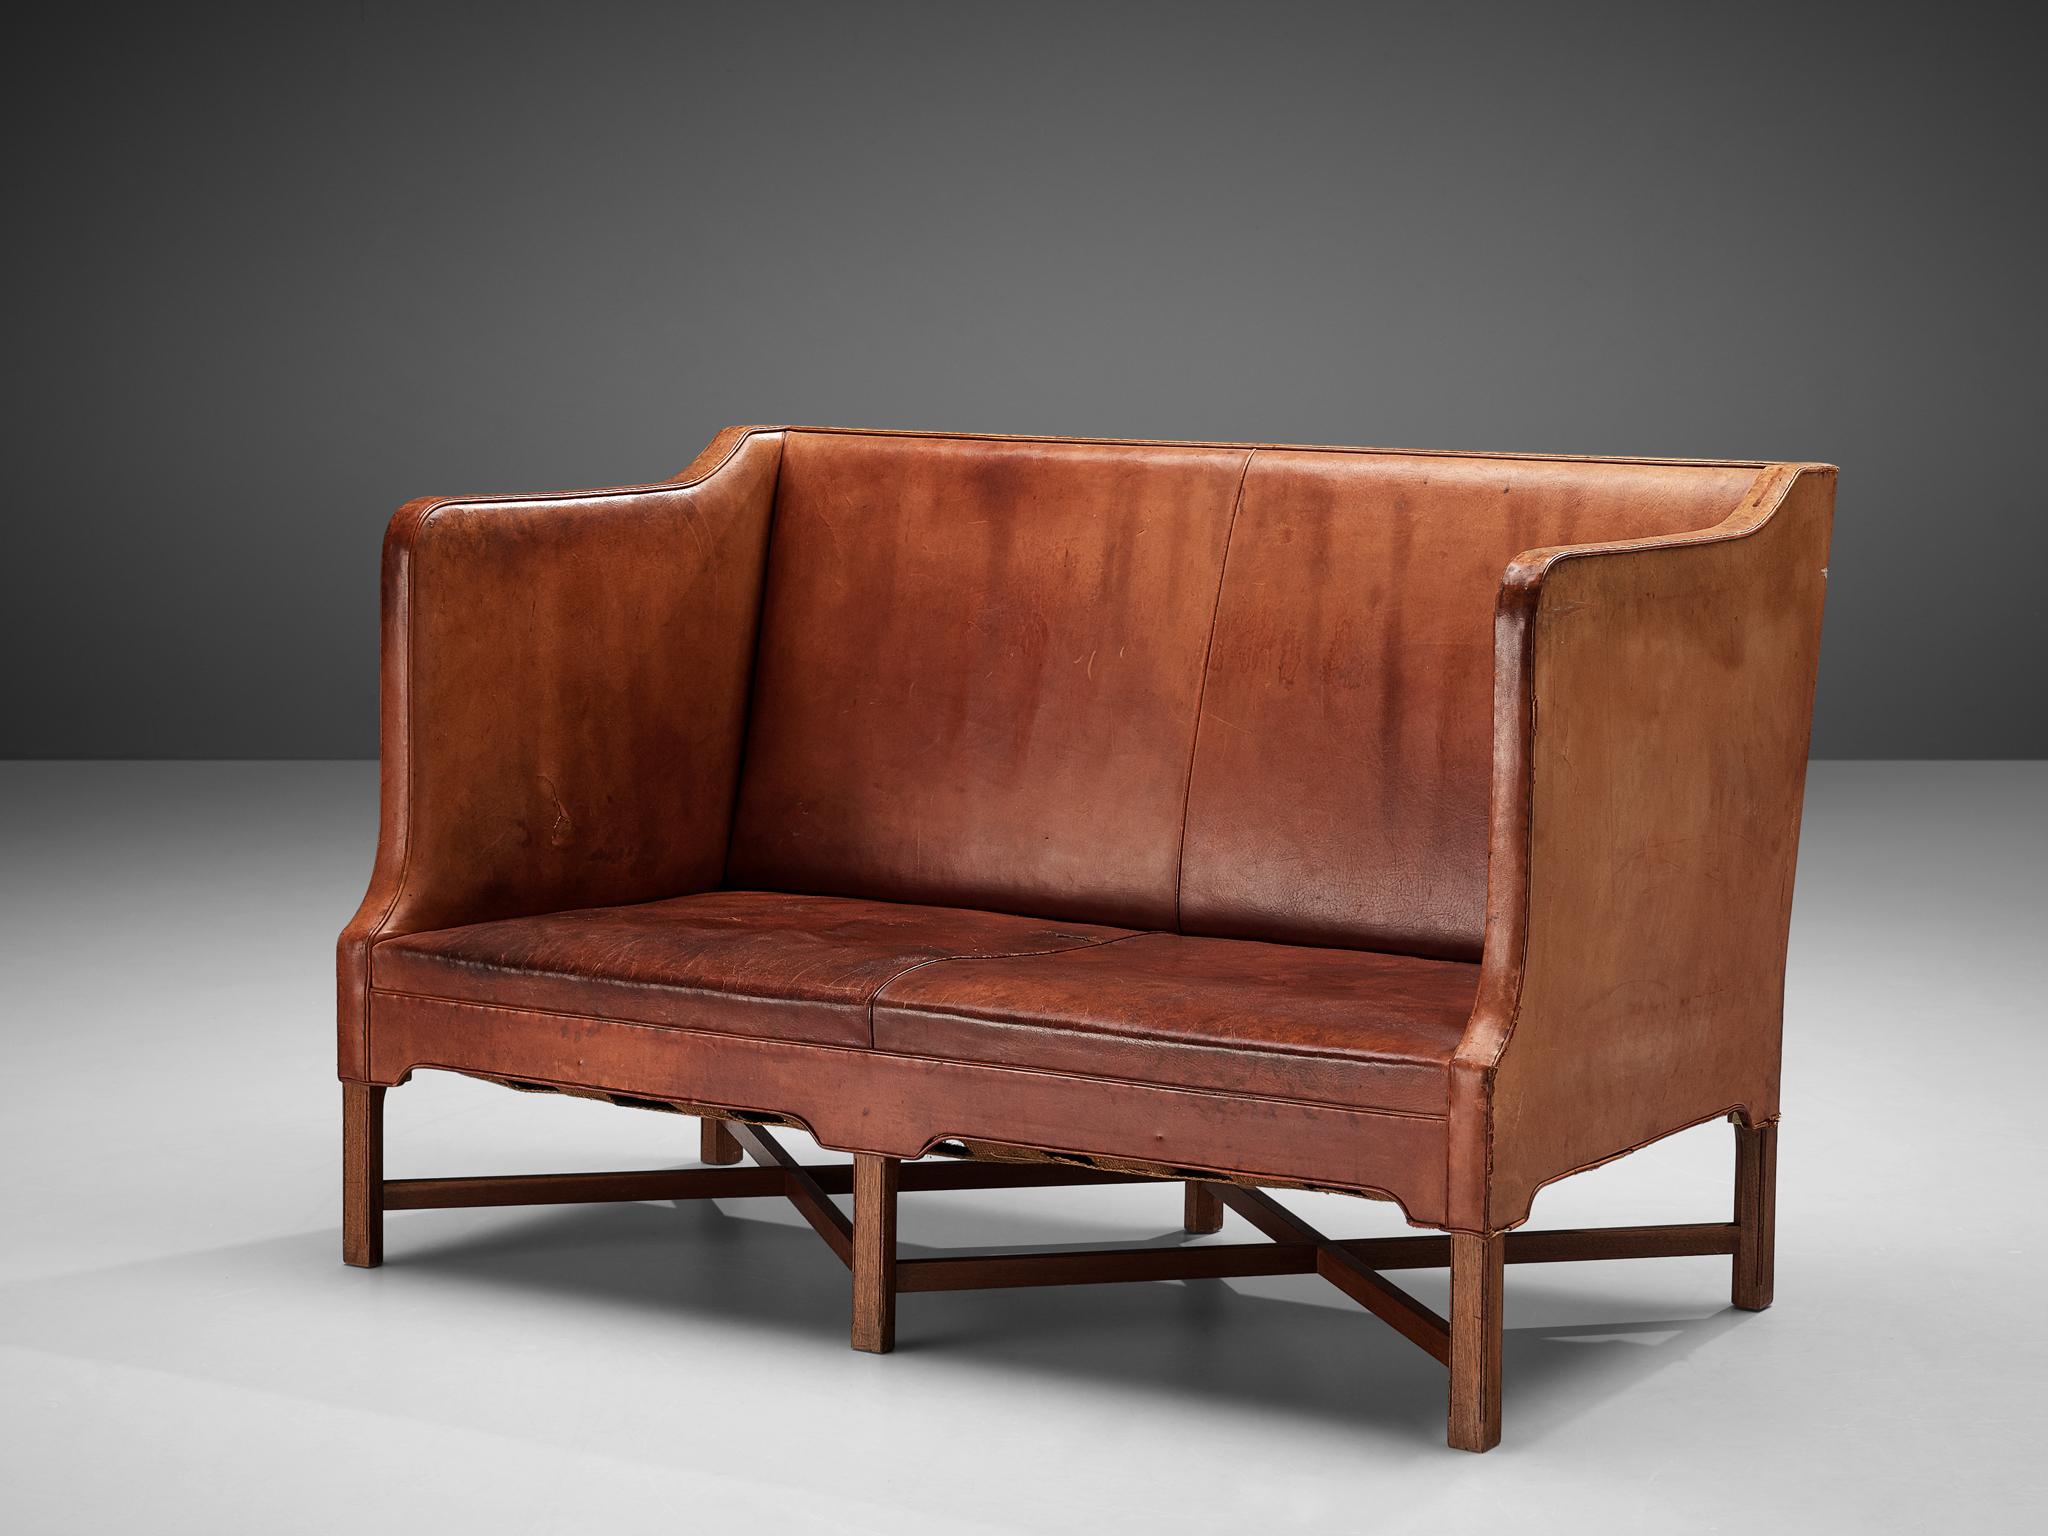 Kaare Klint for Rud Rasmussen, sofa 4118, original leather, mahogany, Denmark, 1930s

Classic and elegant Scandinavian two-seat sofa by Kaare Klint for manufacturer Rud Rasmussen. The piece is upholstered with patinated original leather. The base